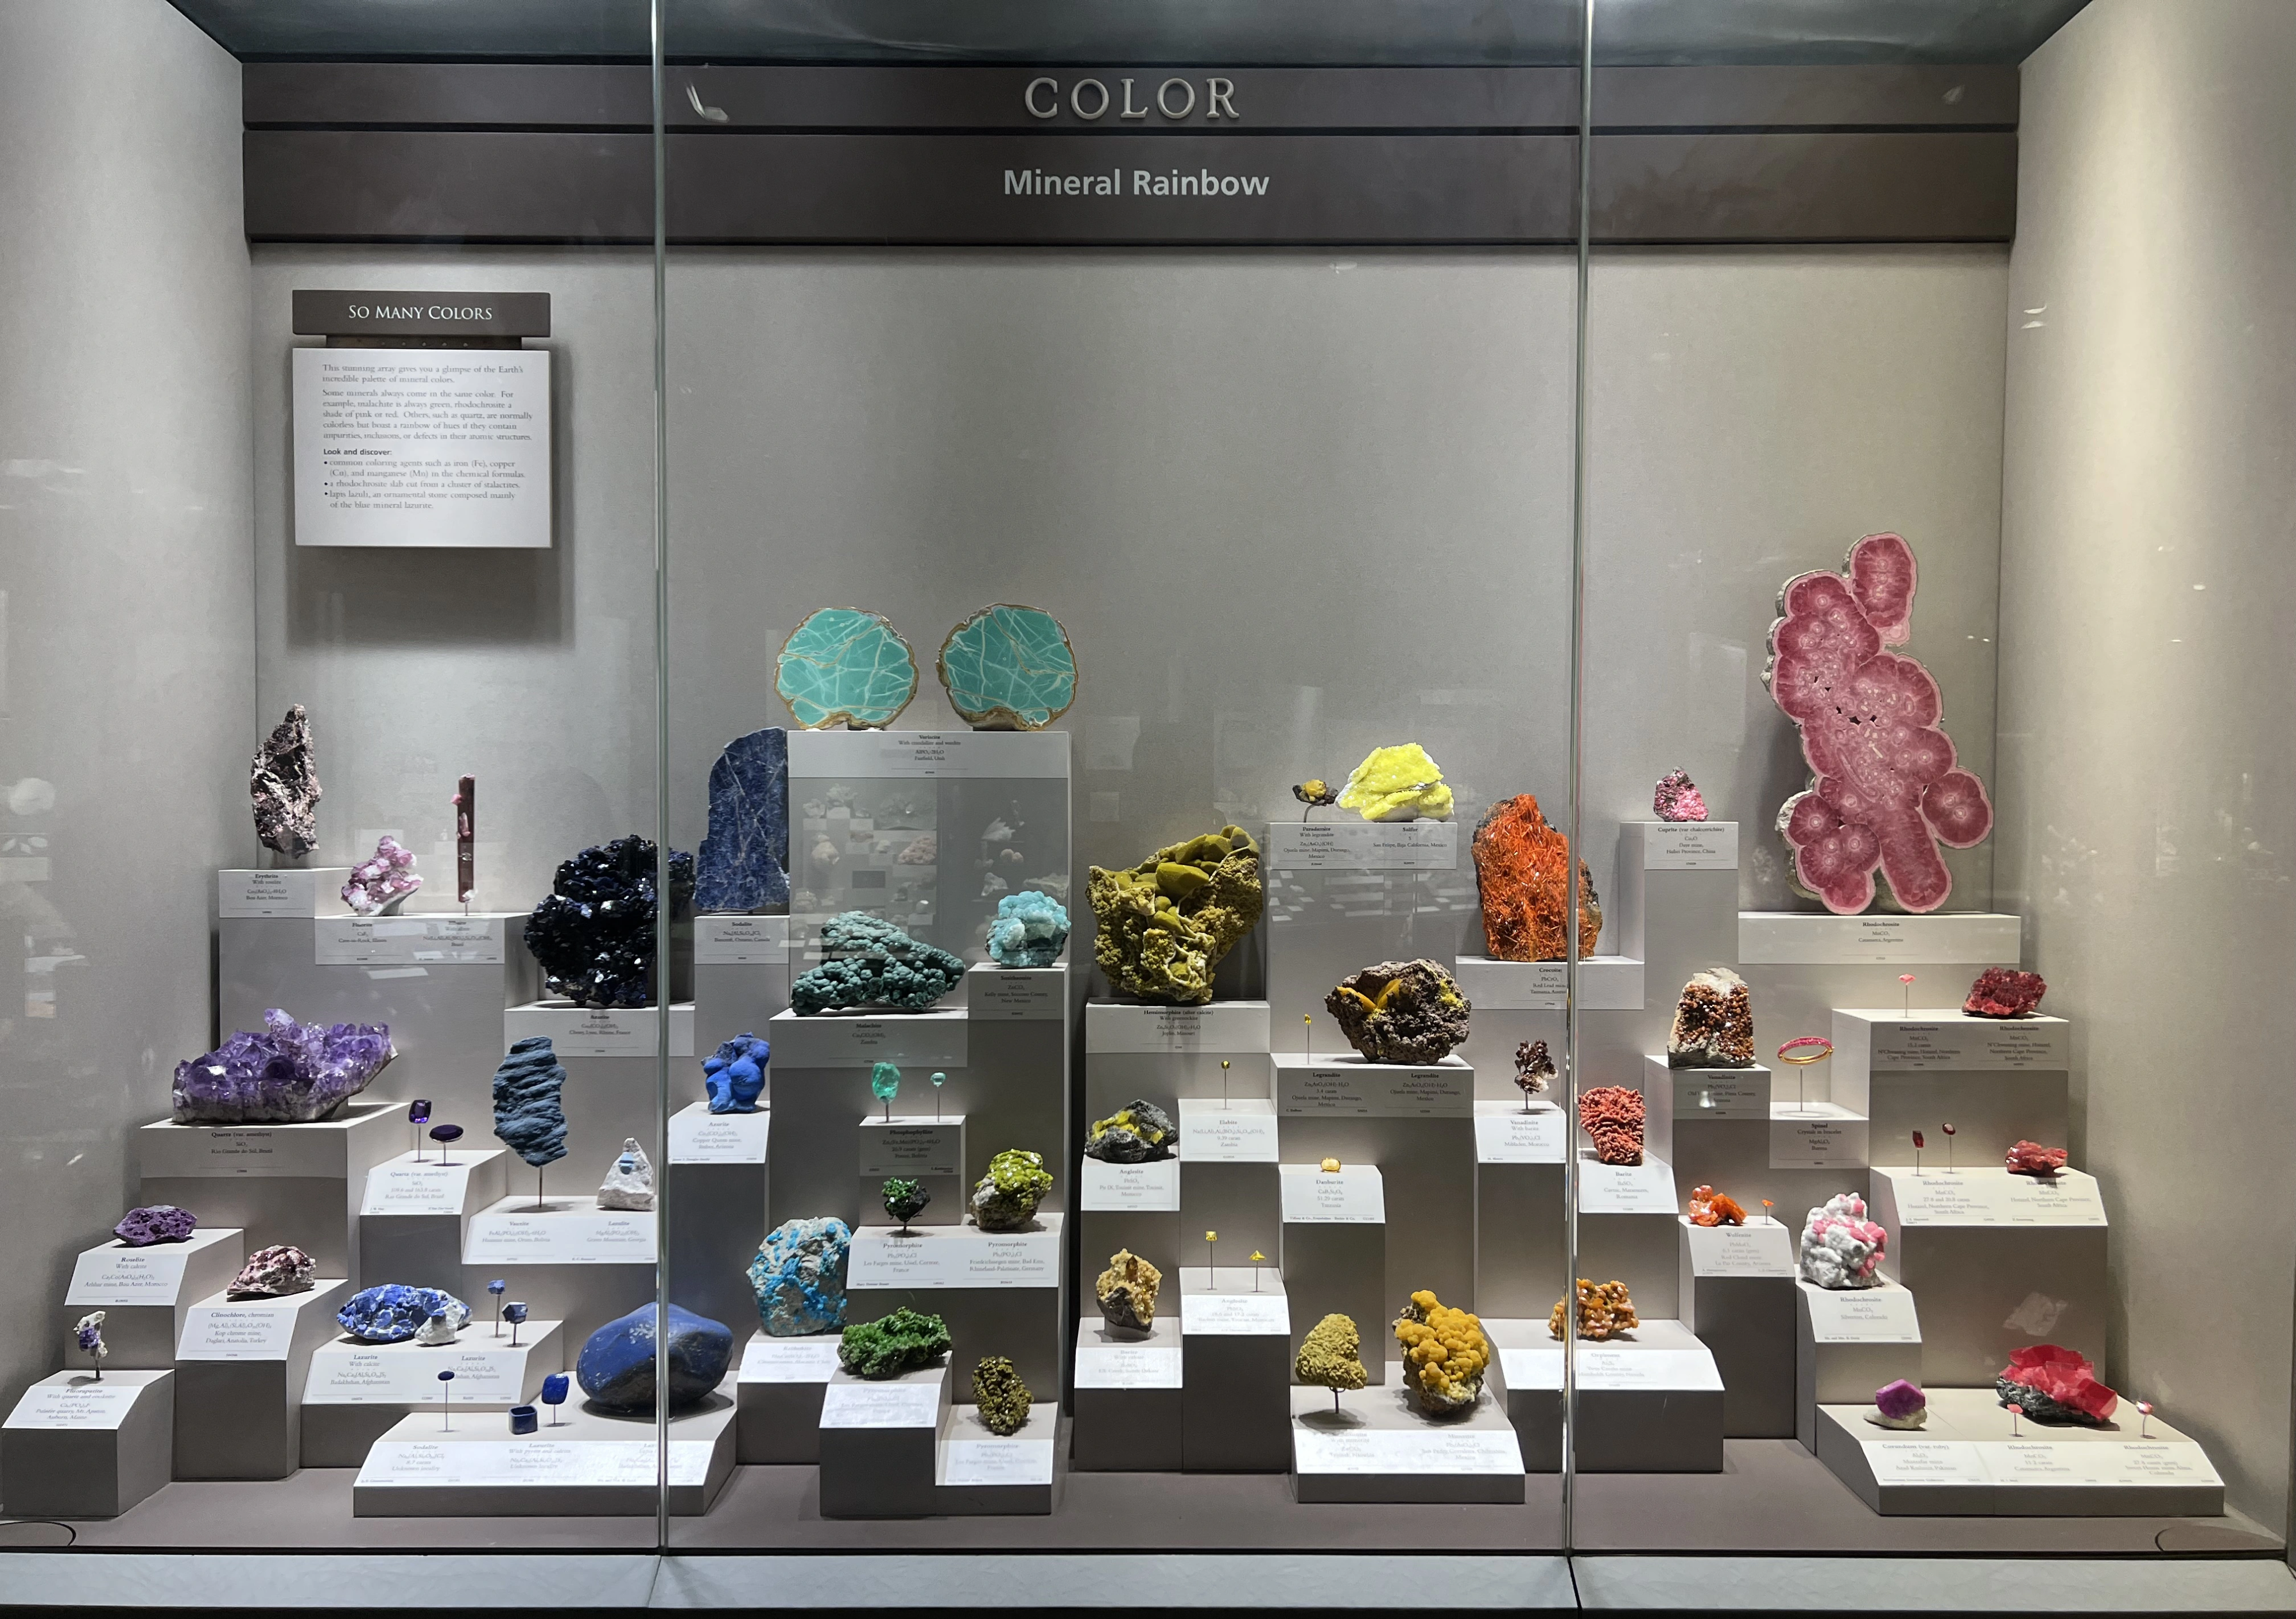 JEWELS MAKING HISTORY: Touring the Smithsonian Museum Gem & Mineral Hall